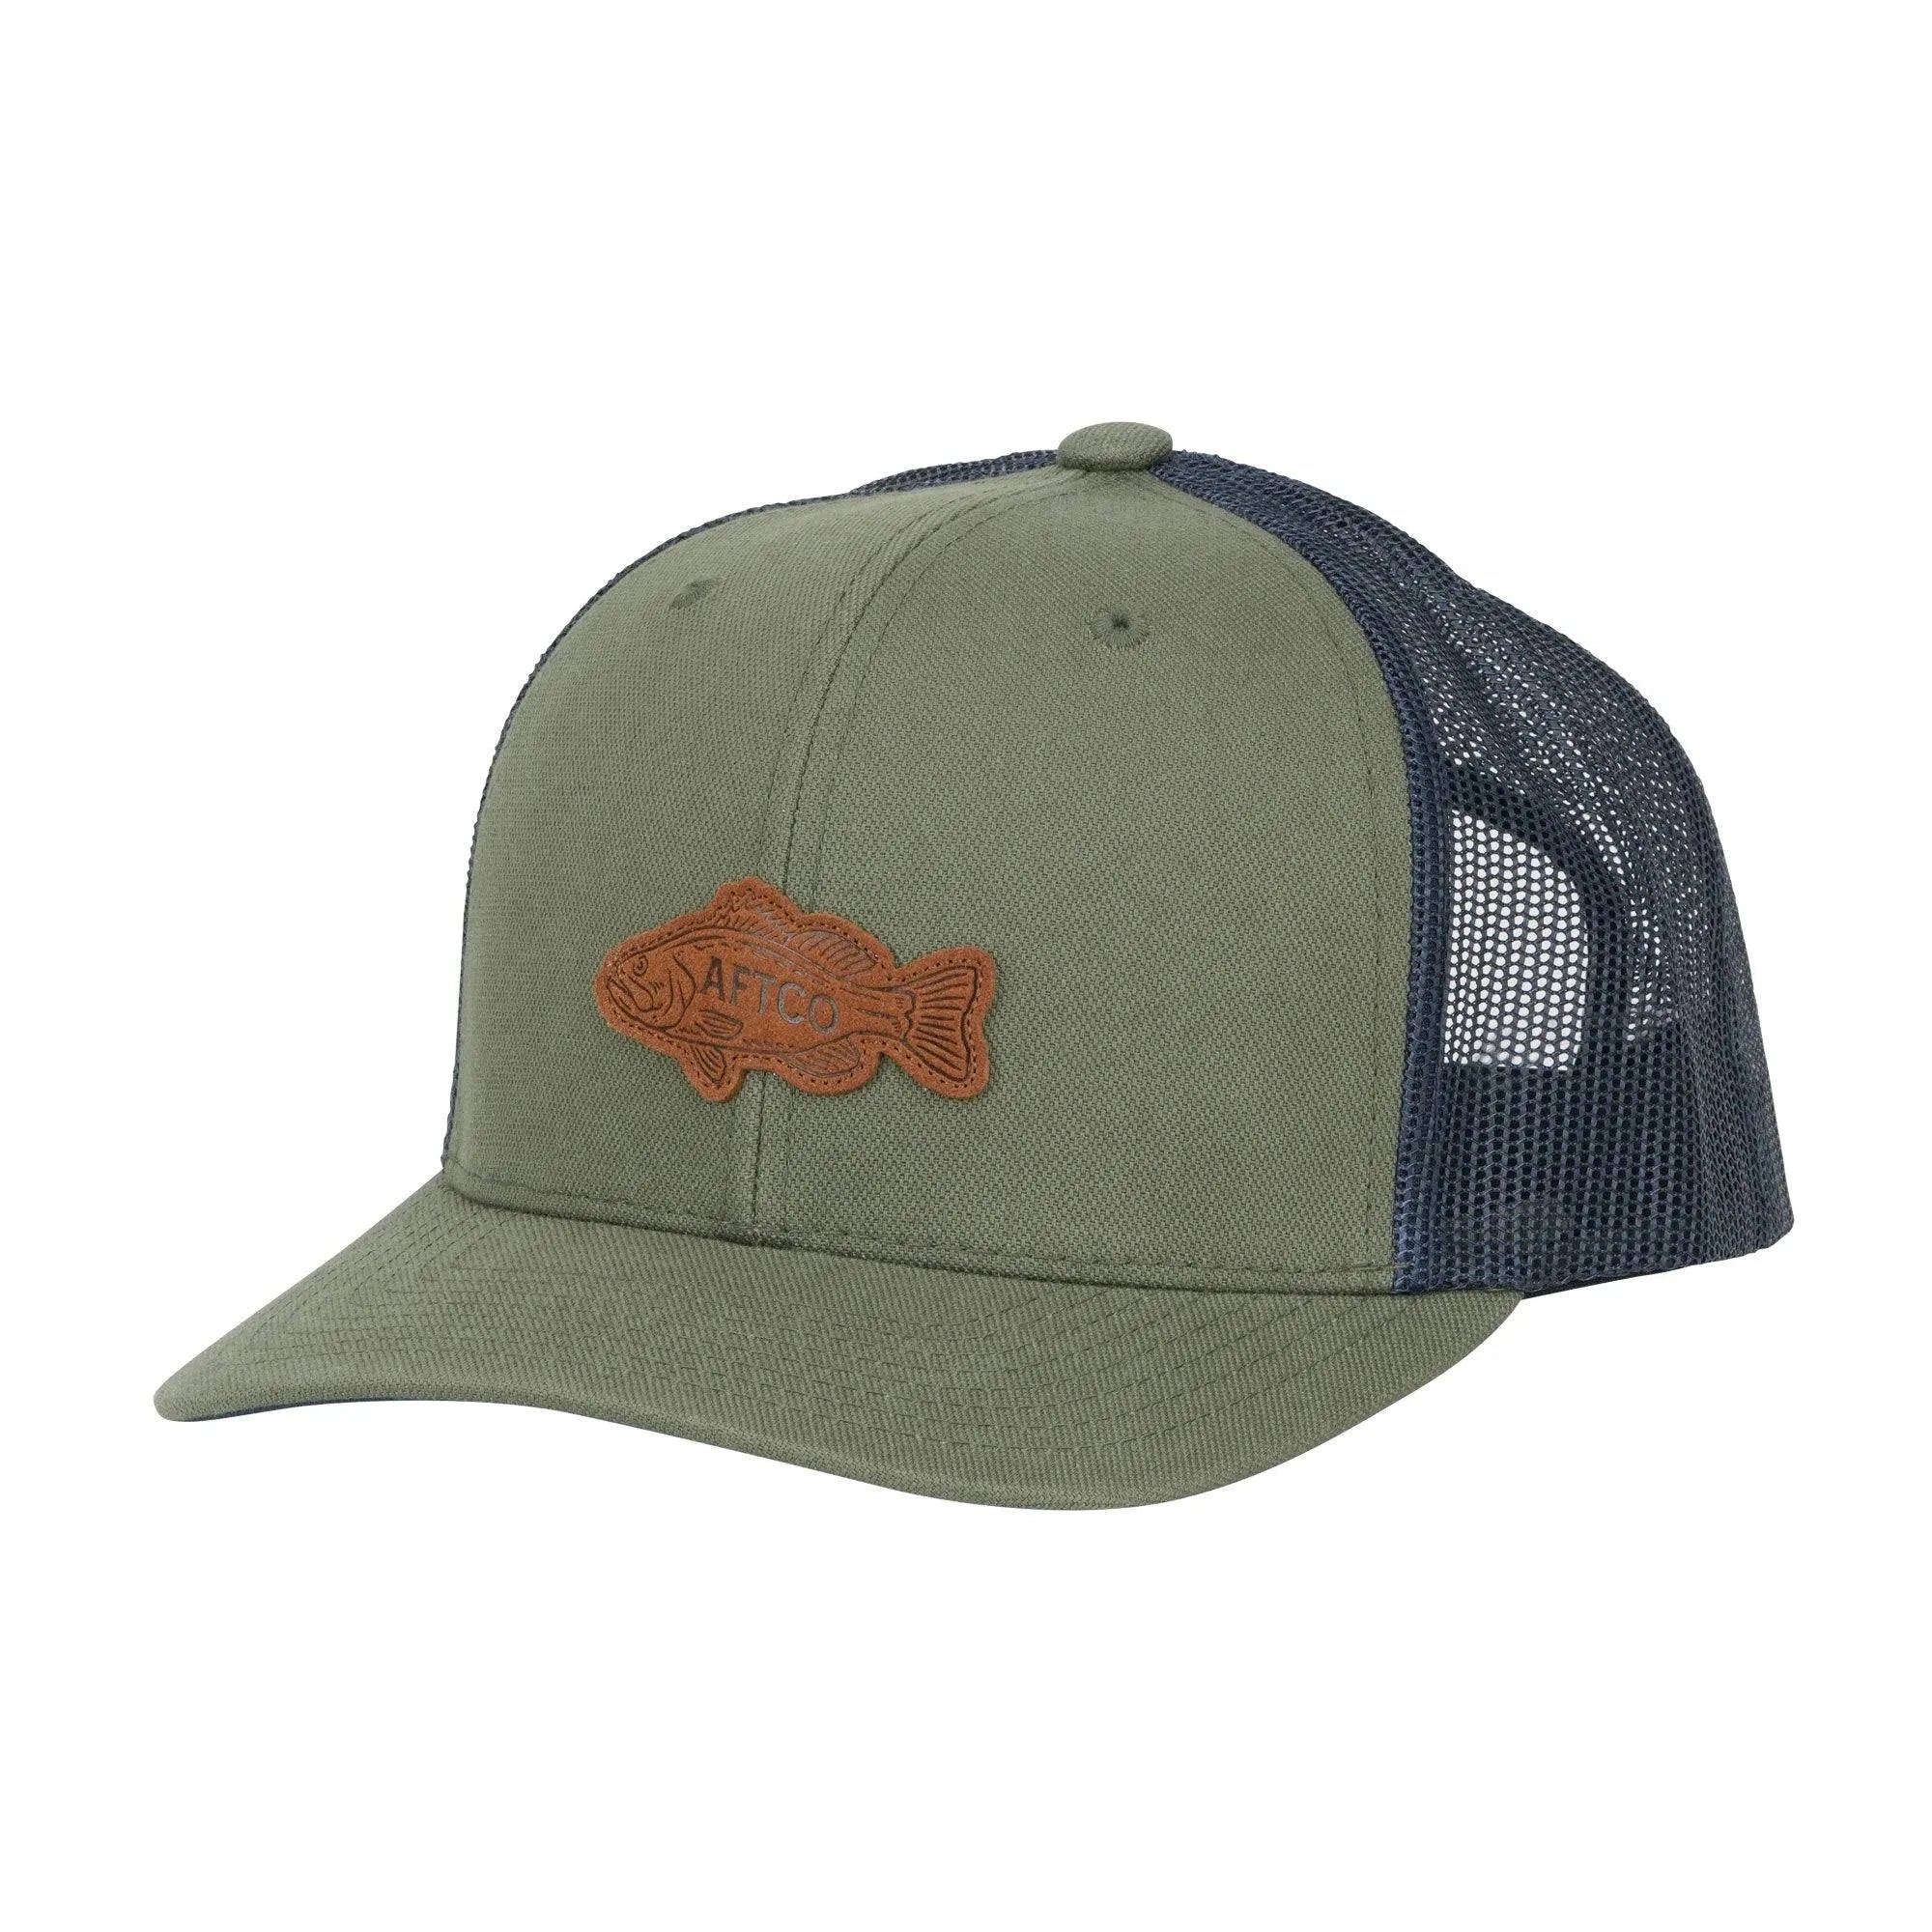 Buy Megabass Psychic Camo Hat at best prices 